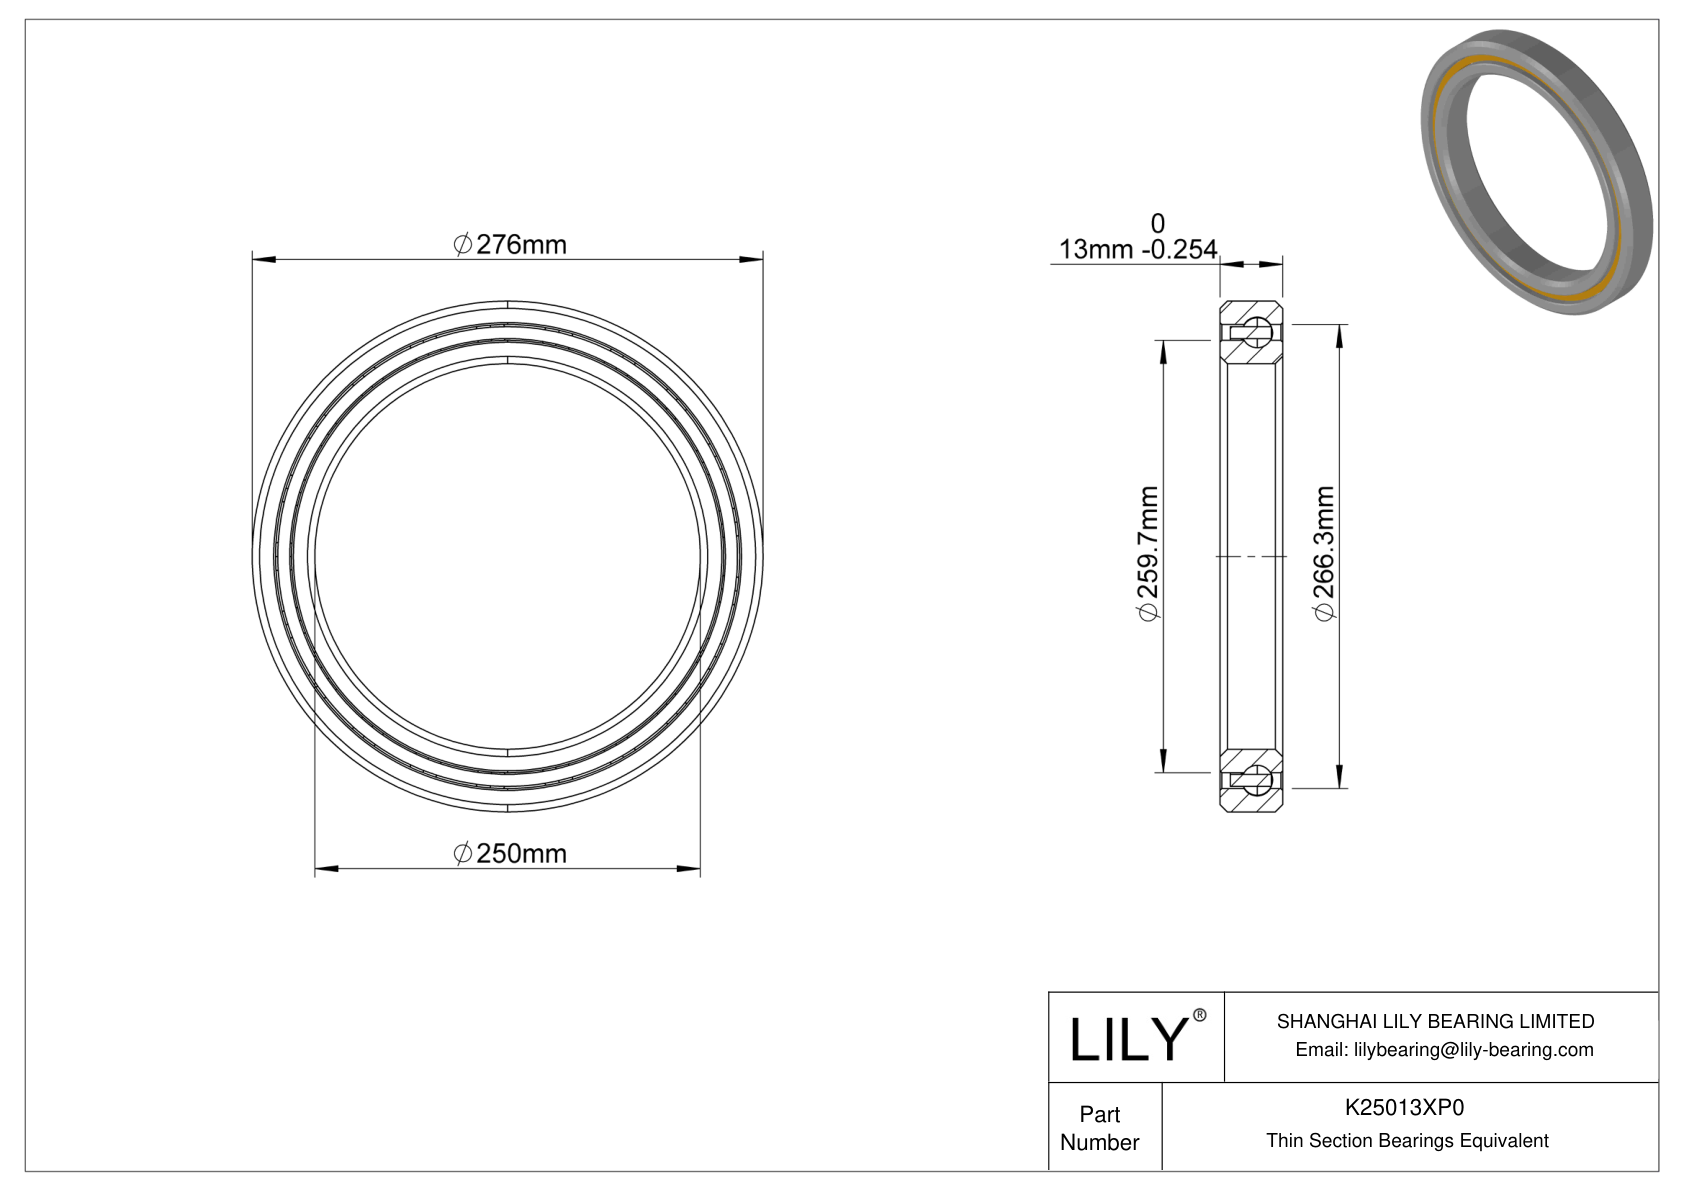 K25013XP0 Constant Section (CS) Bearings cad drawing